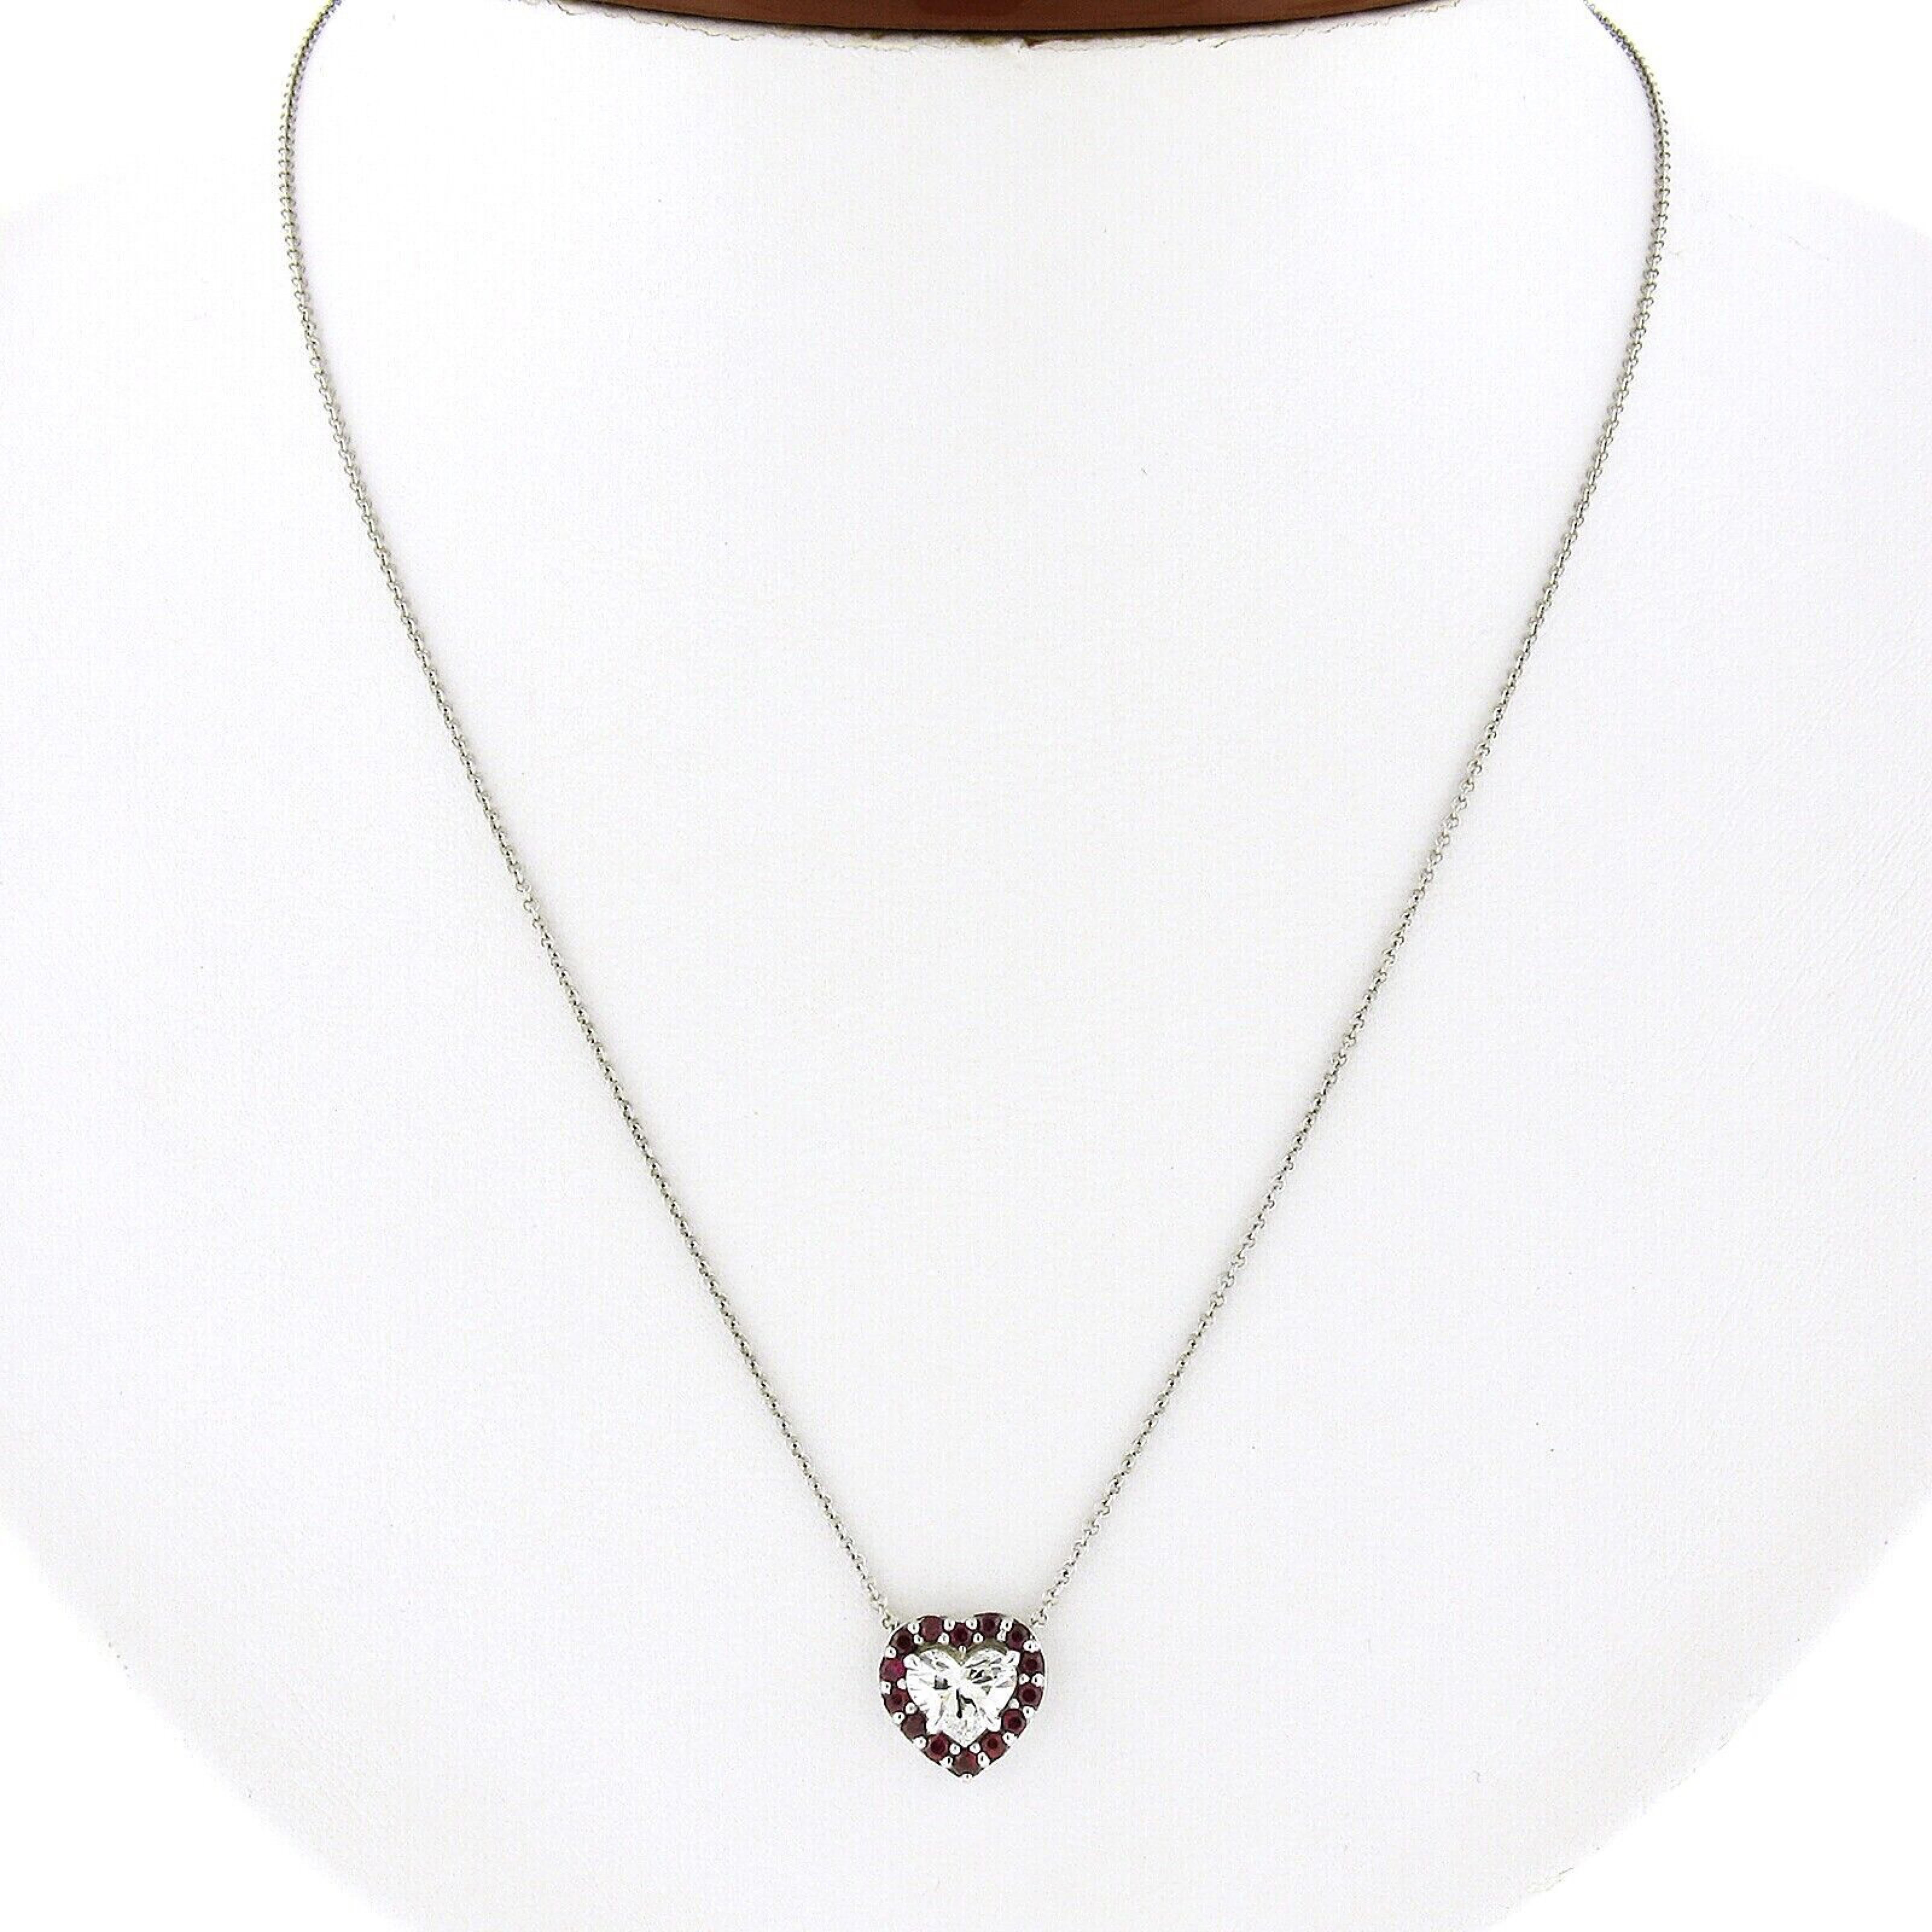 Here we have a gorgeous, brand new and custom made pendant necklace crafted in solid 18k white gold and features a lovely heart design constructed from a very fine, GIA certified, heart brilliant cut diamond solitaire neatly set at the center in